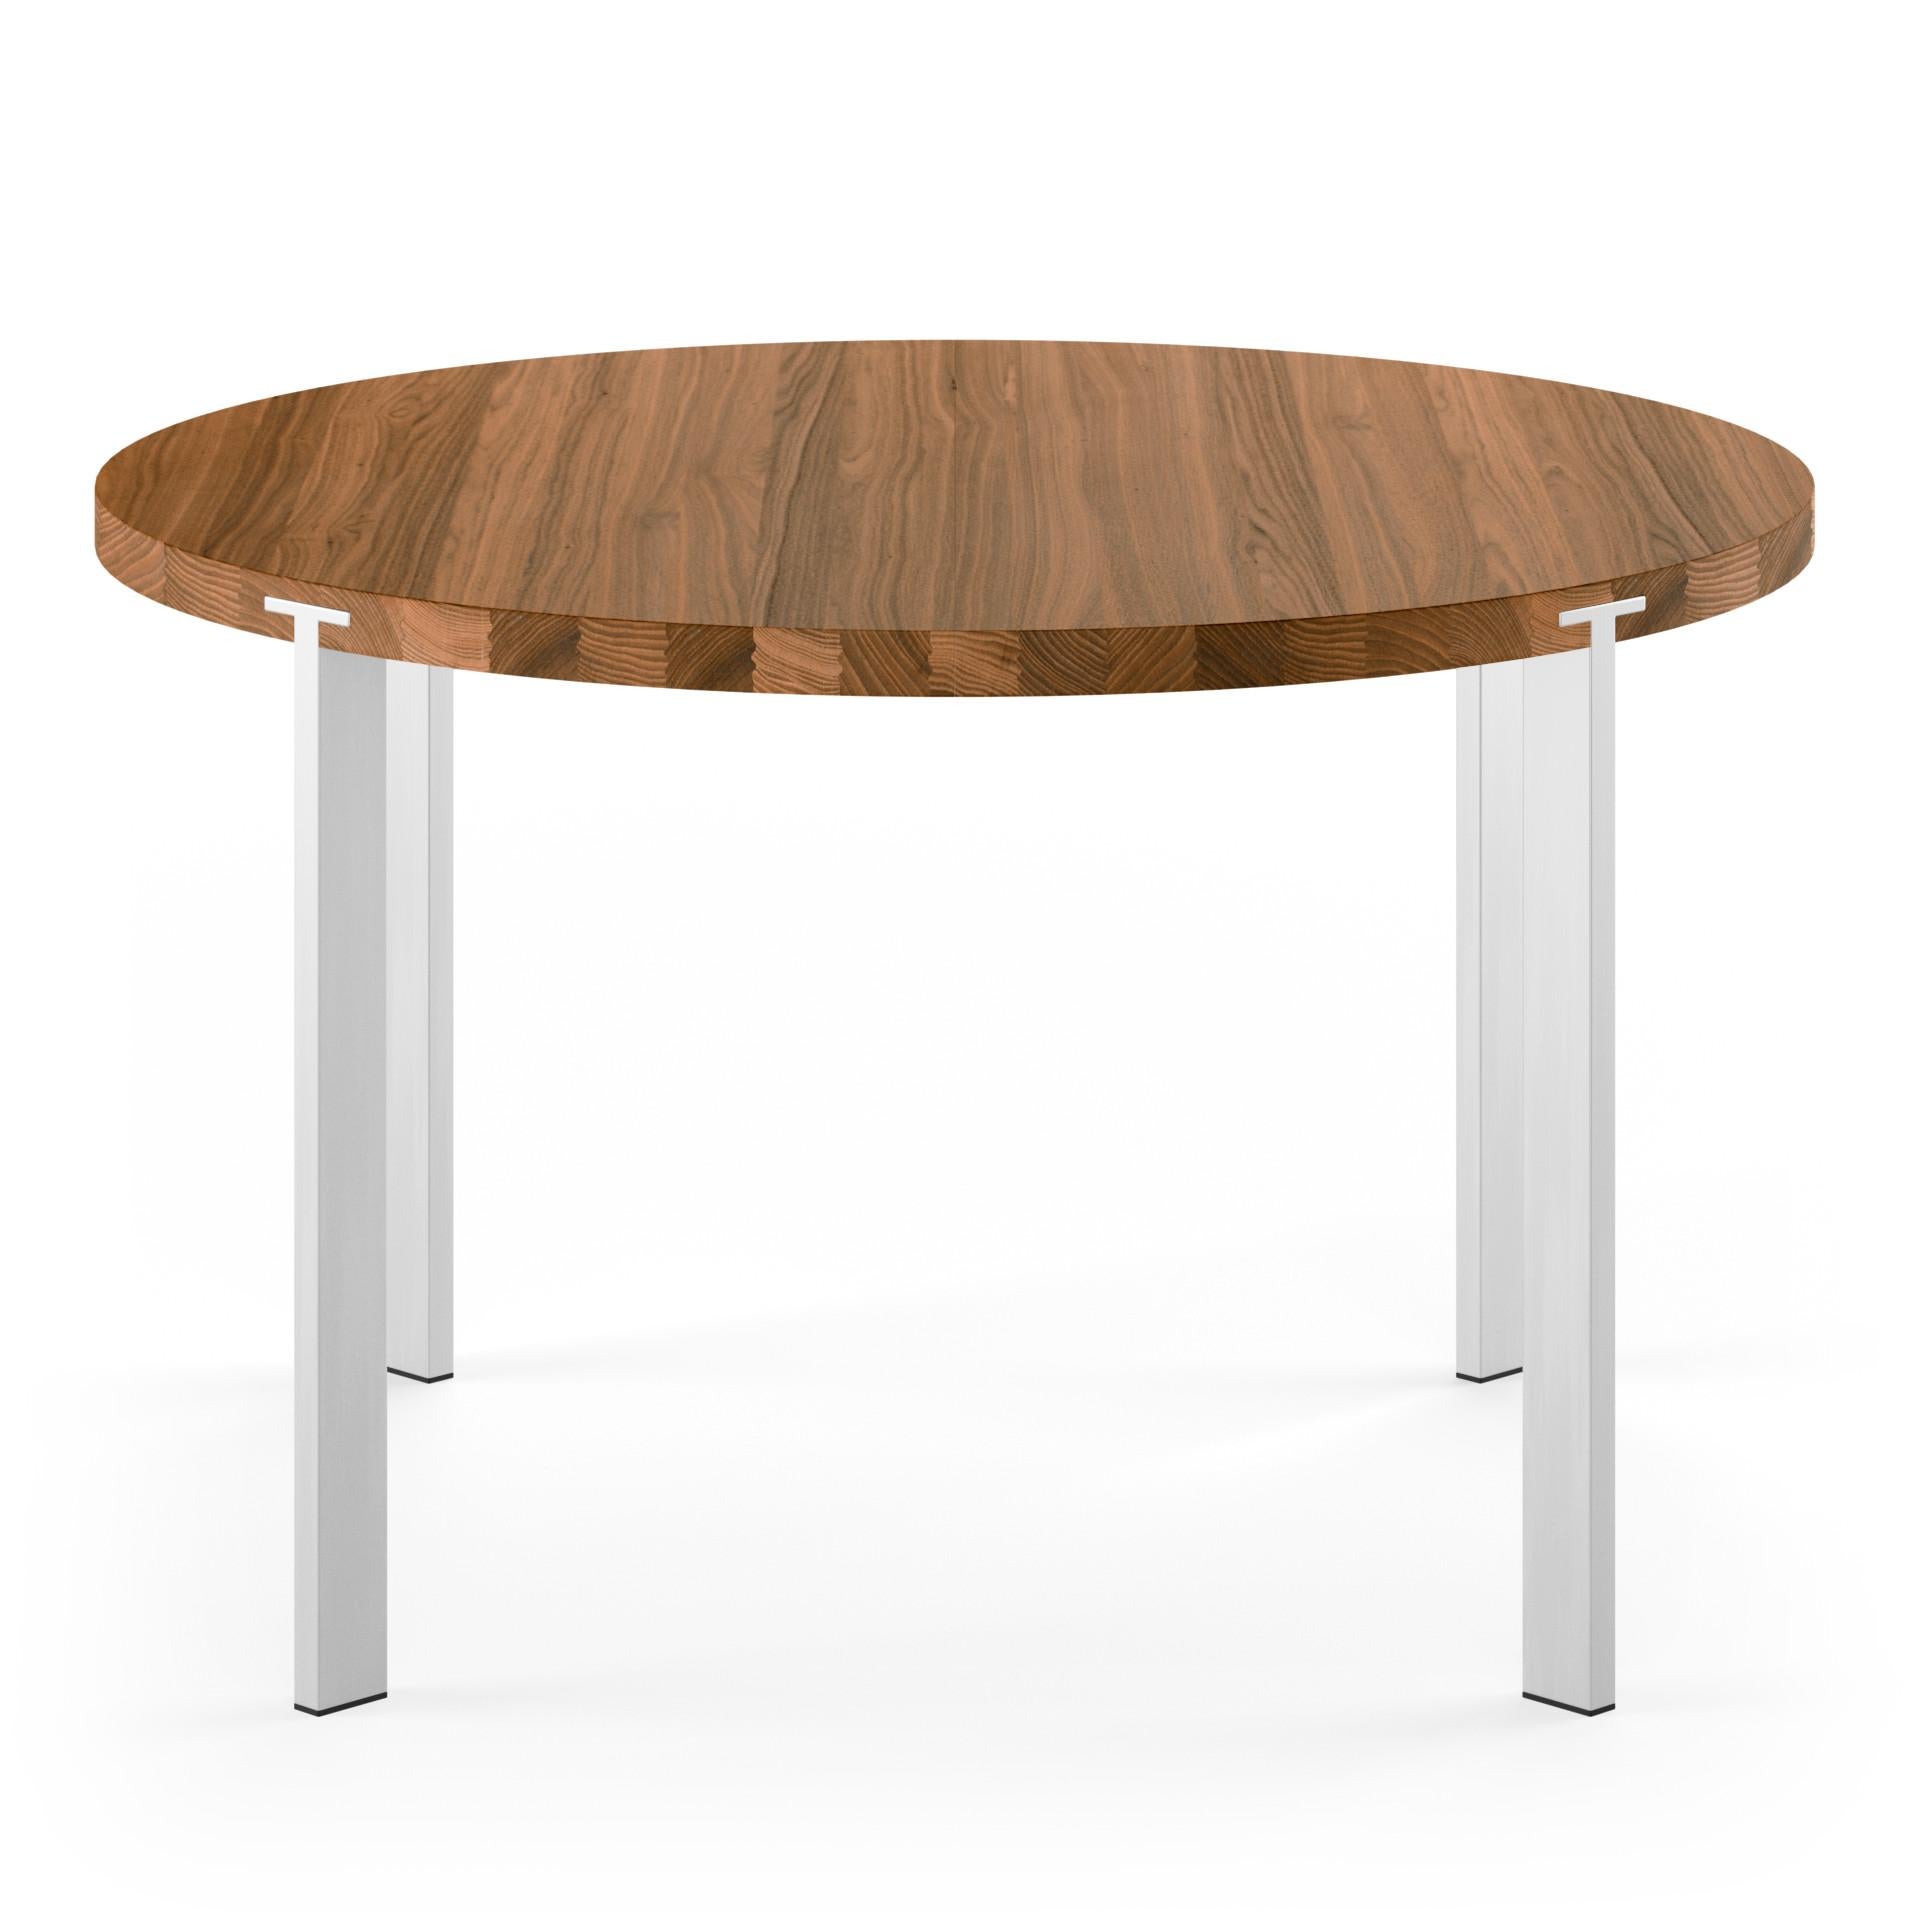 The GM 2100 series is designed with an eye for detail without compromising on a simple and elegant expression. The steel legs is elegantly combined with the solid wood, giving the table its unique and distinctive expression.

The GM 2100 table